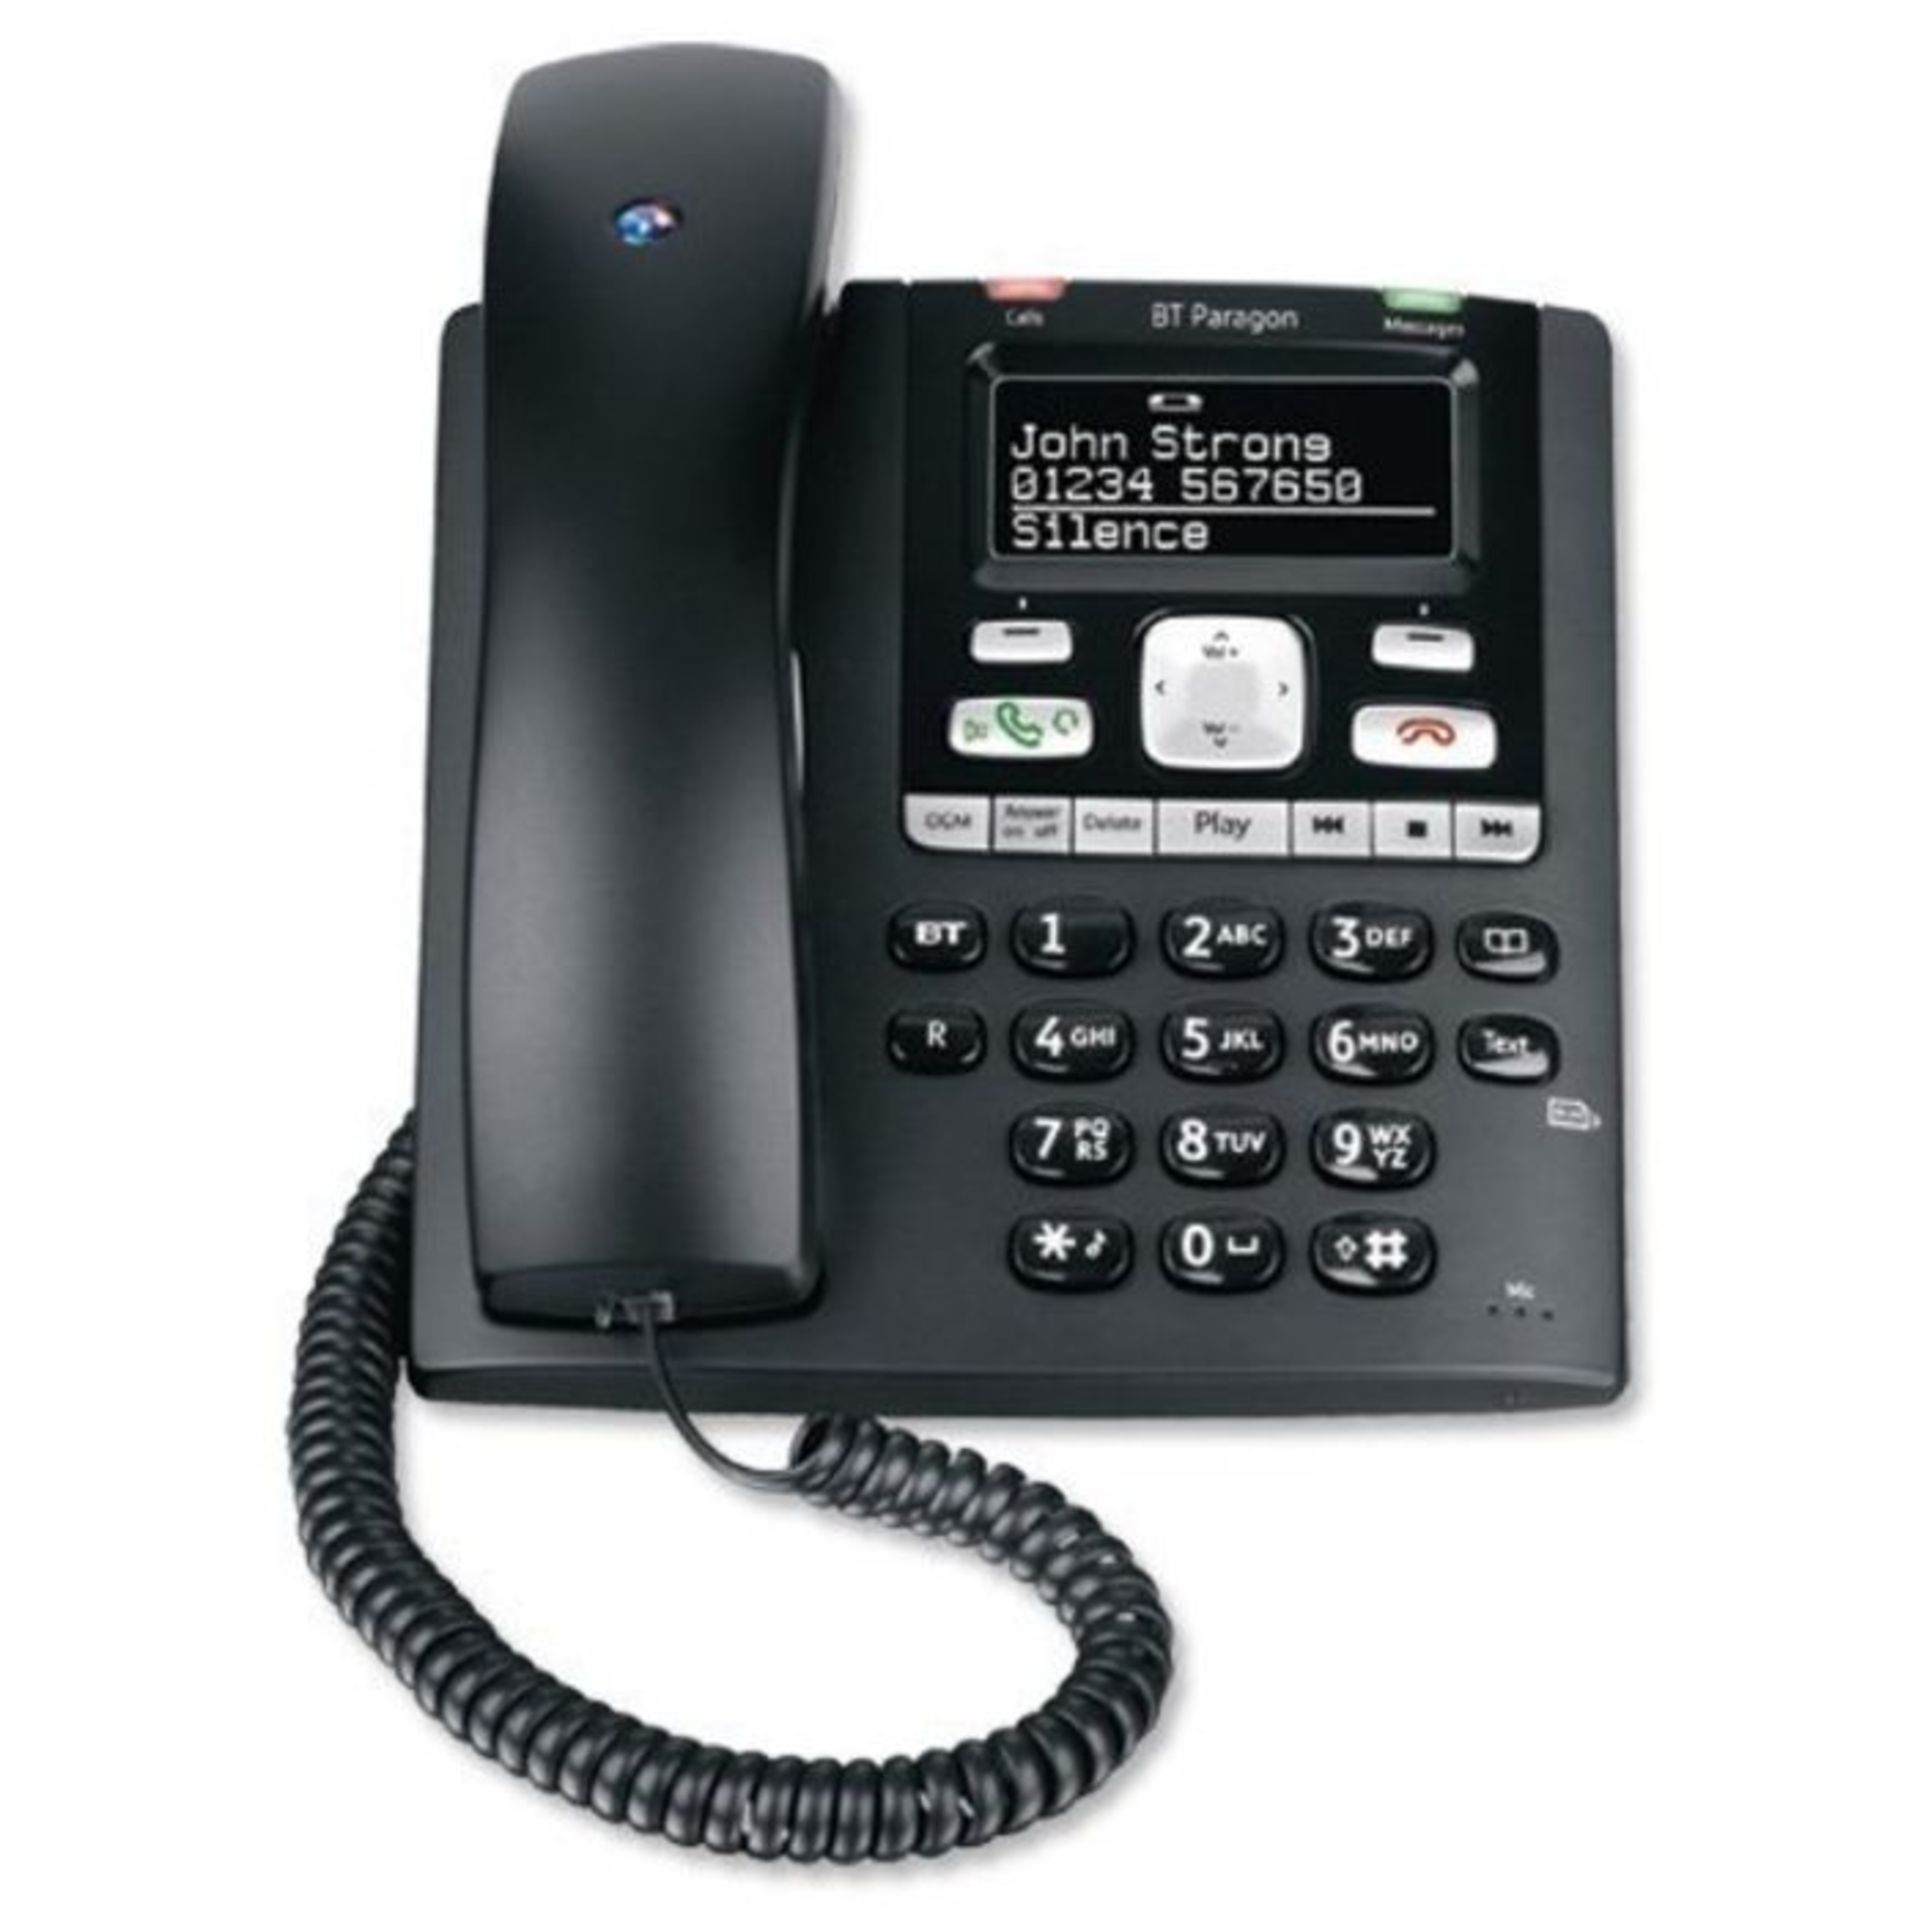 RRP £60.00 BT Paragon 650 Telephone Corded Answer Machine 200 Memories SMS Caller Inverse Display